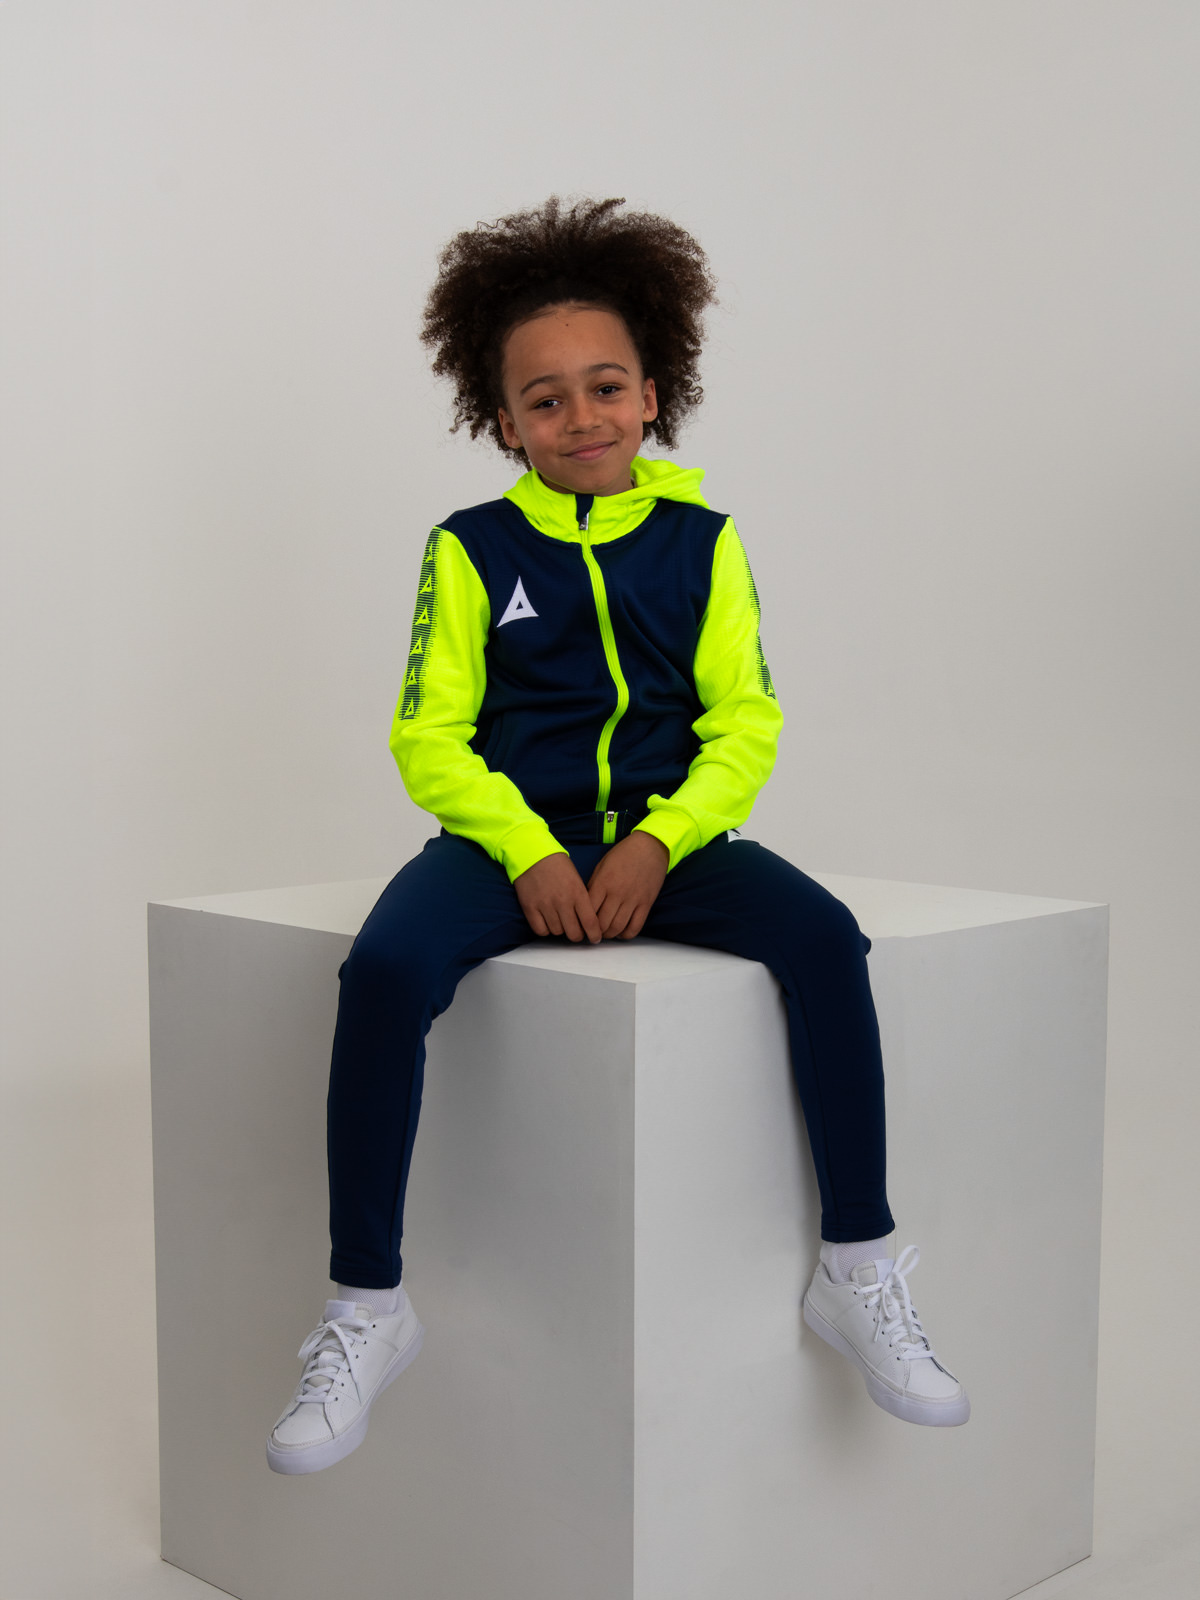 a young boy sitting on a box wearing a navy and yellow hoody and matching navy jogging bottoms